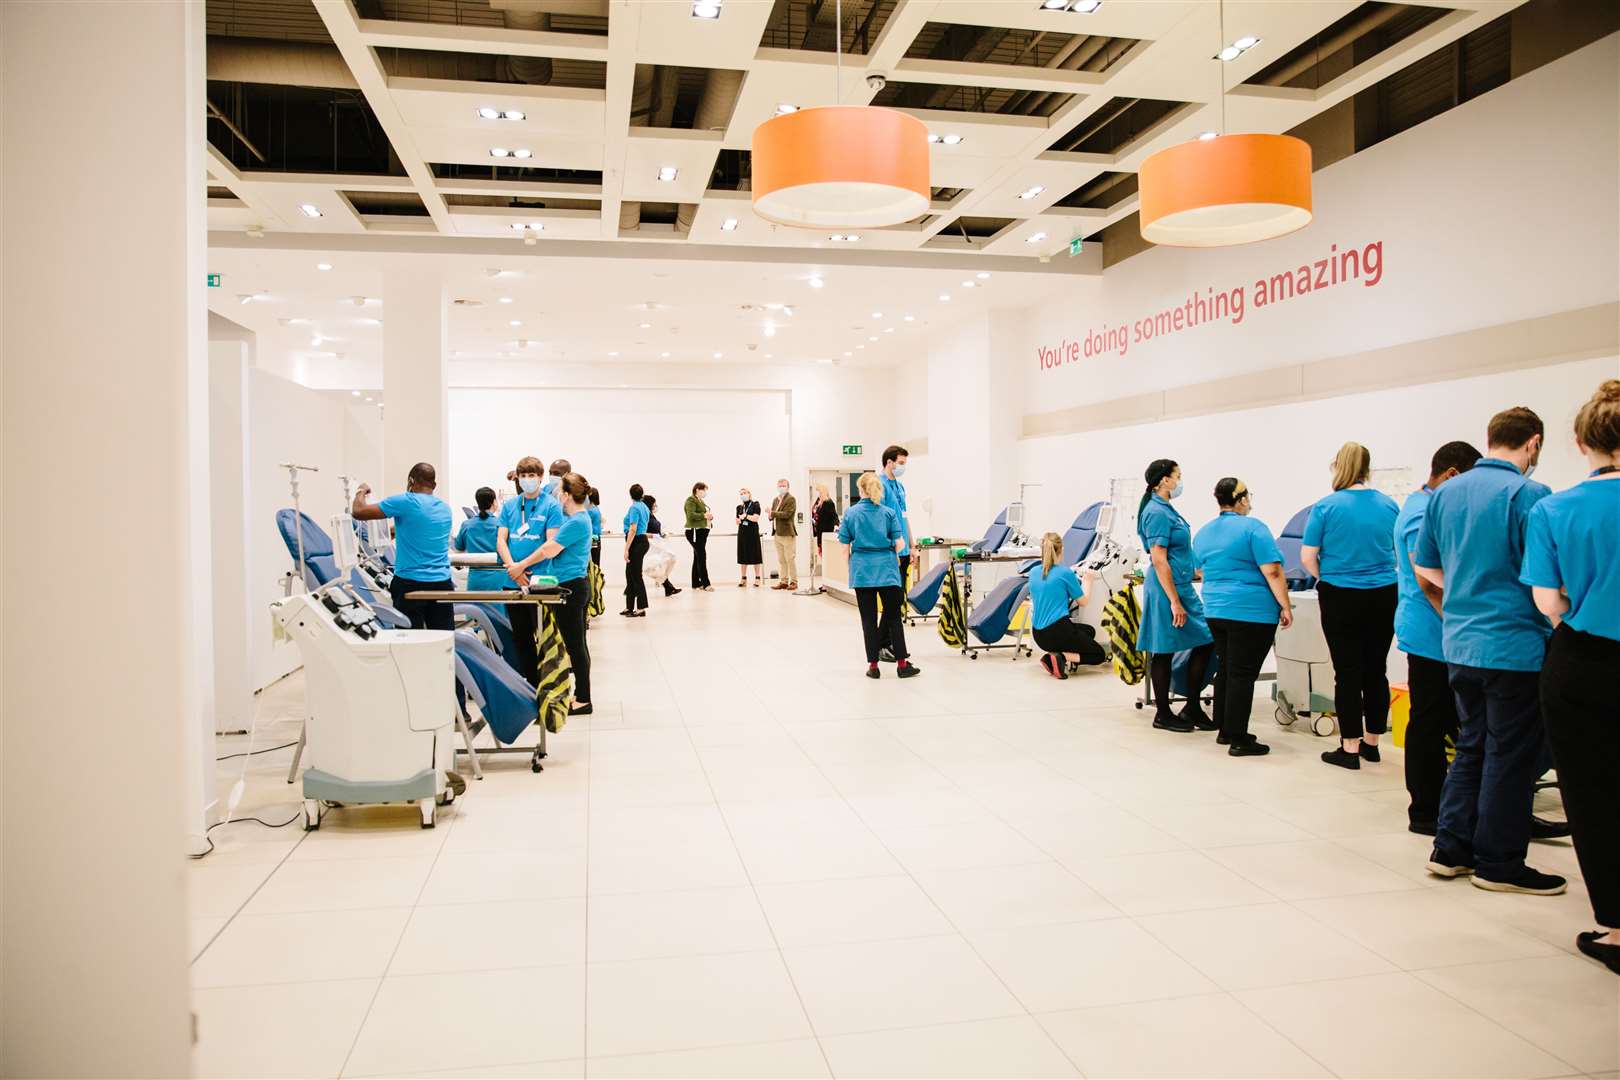 A plasma donation centre similar to one at Stratford Westfield will open in Ashford. Picture: NHS